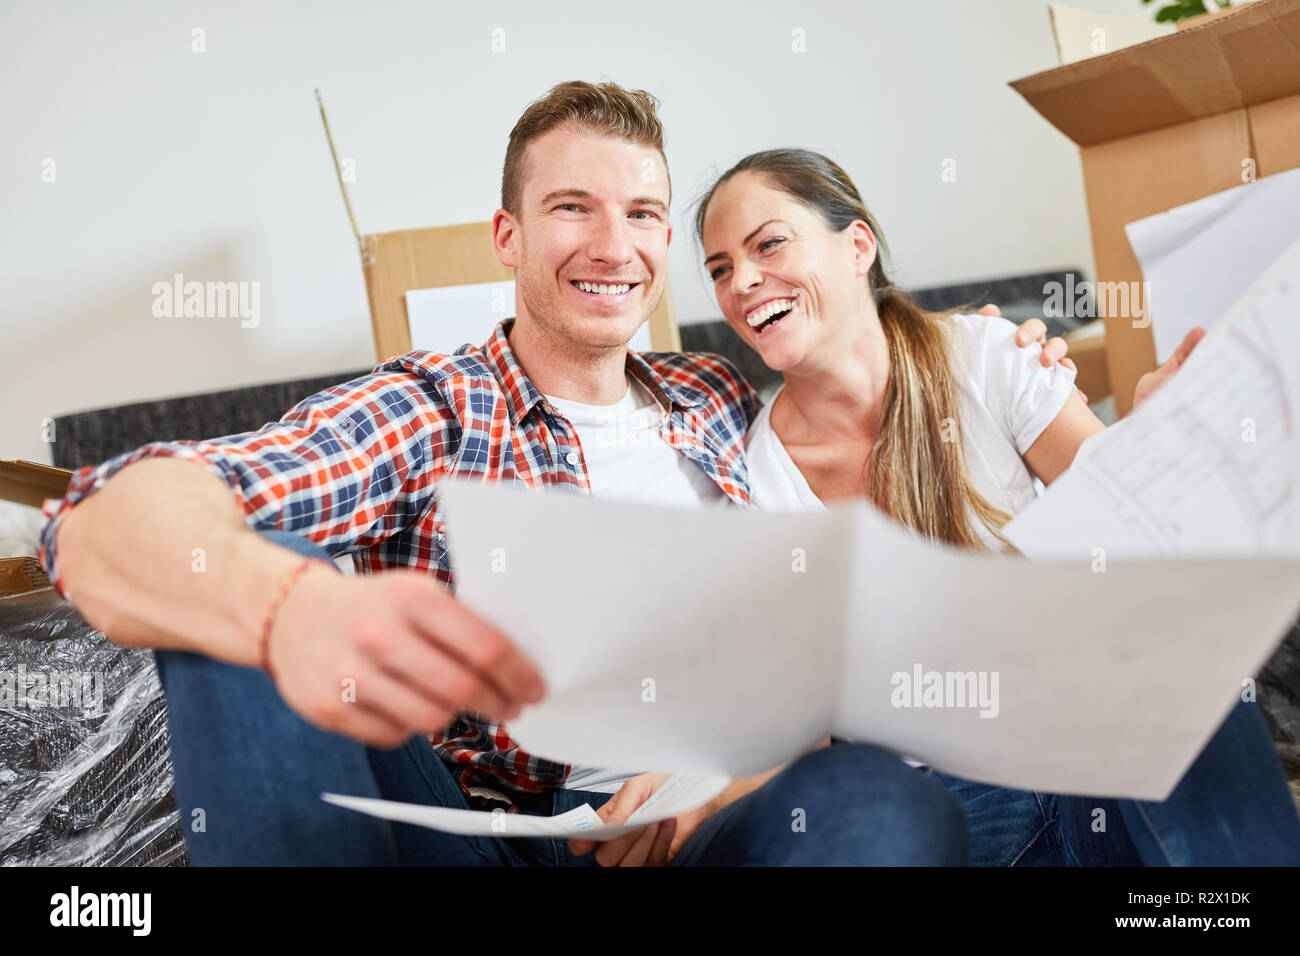 Laughing young couple with blueprint looking forward to the new house as a home Stock Photo